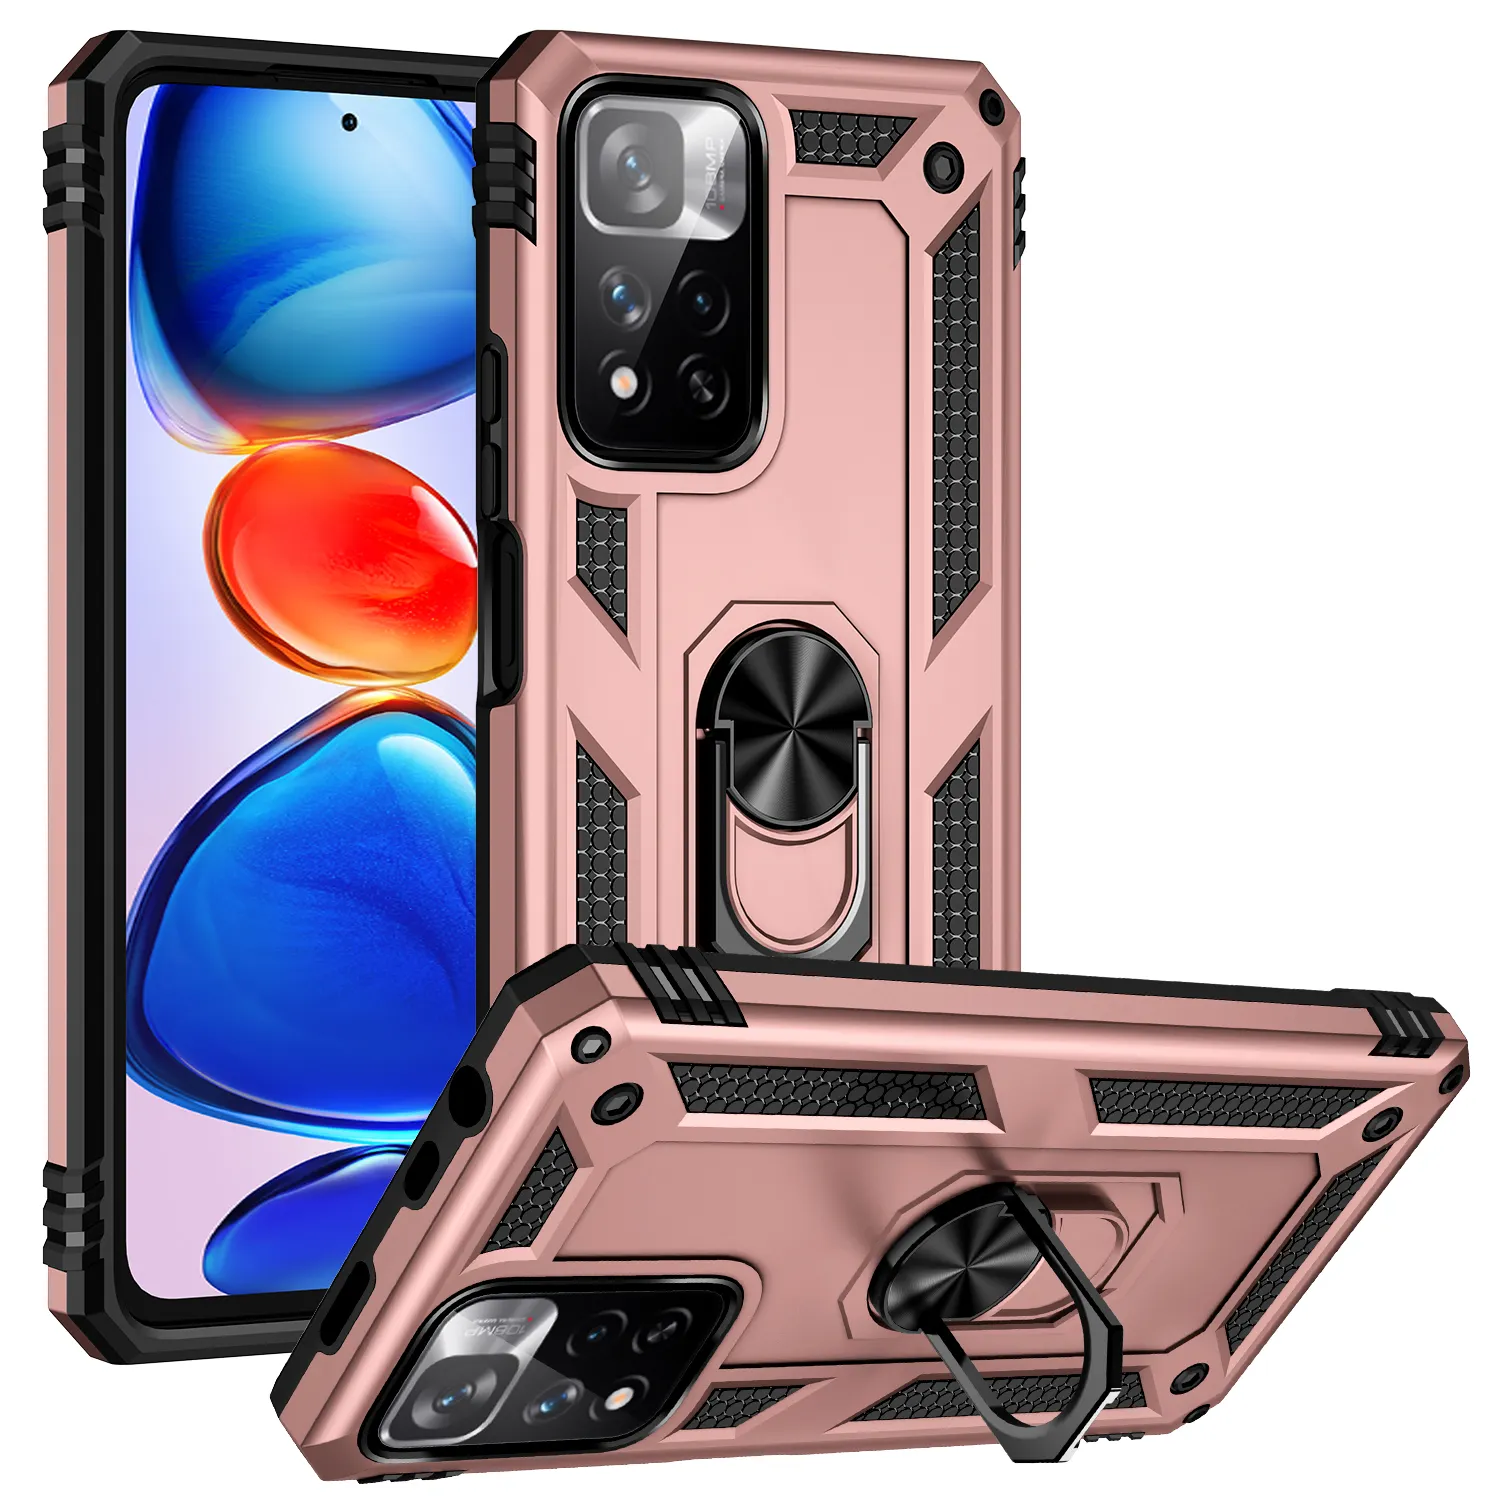 Heavy Duty Drop Protection Phone Case for XIaomi Redmi Note 11 Pro (China) shockproof case for Redmi Note 11 Pro+ (China)